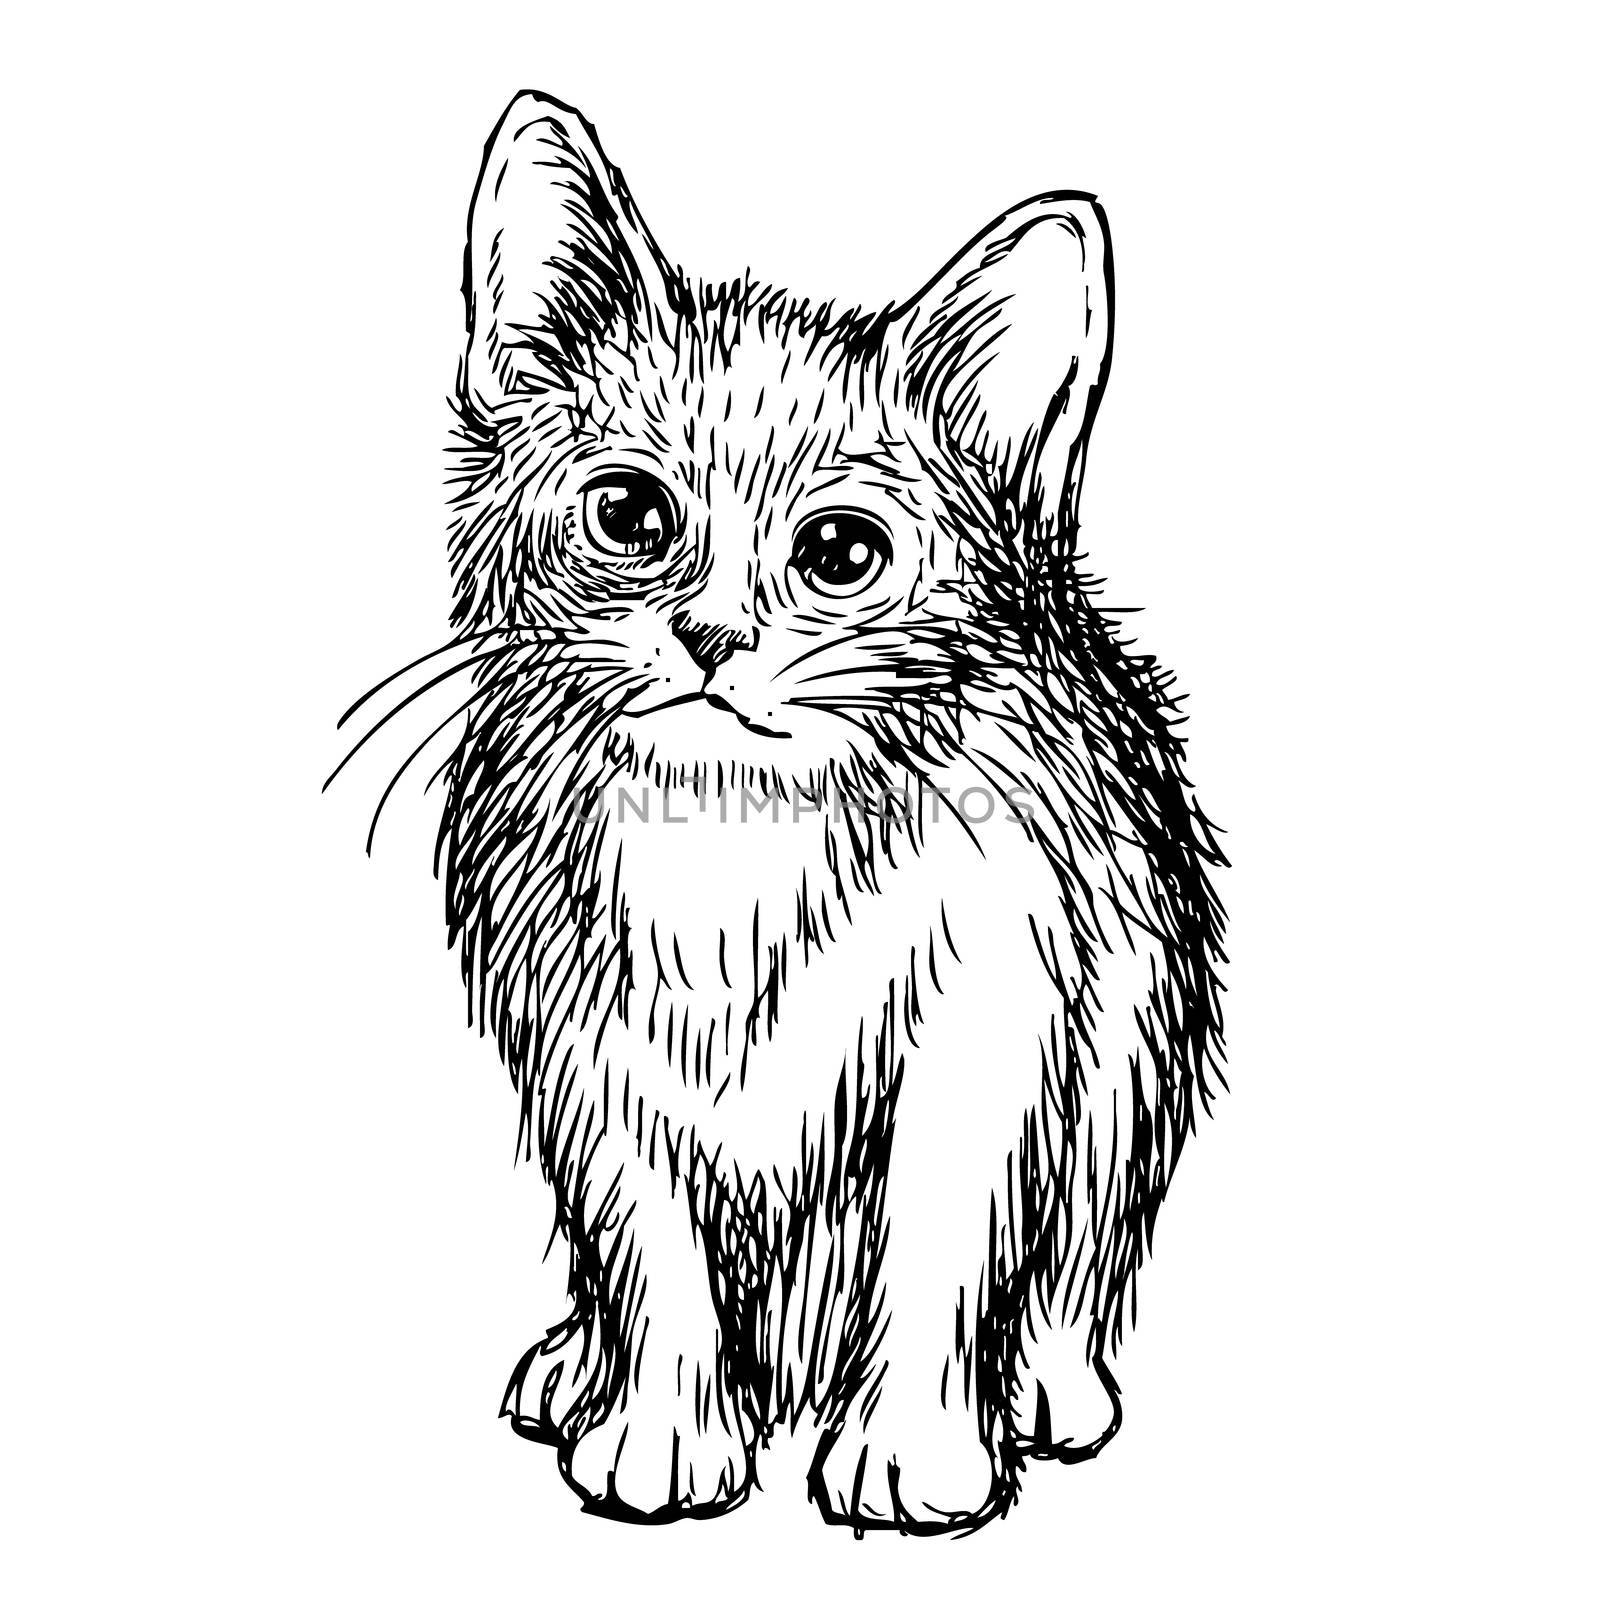 freehand sketch illustration of little cat by simpleBE